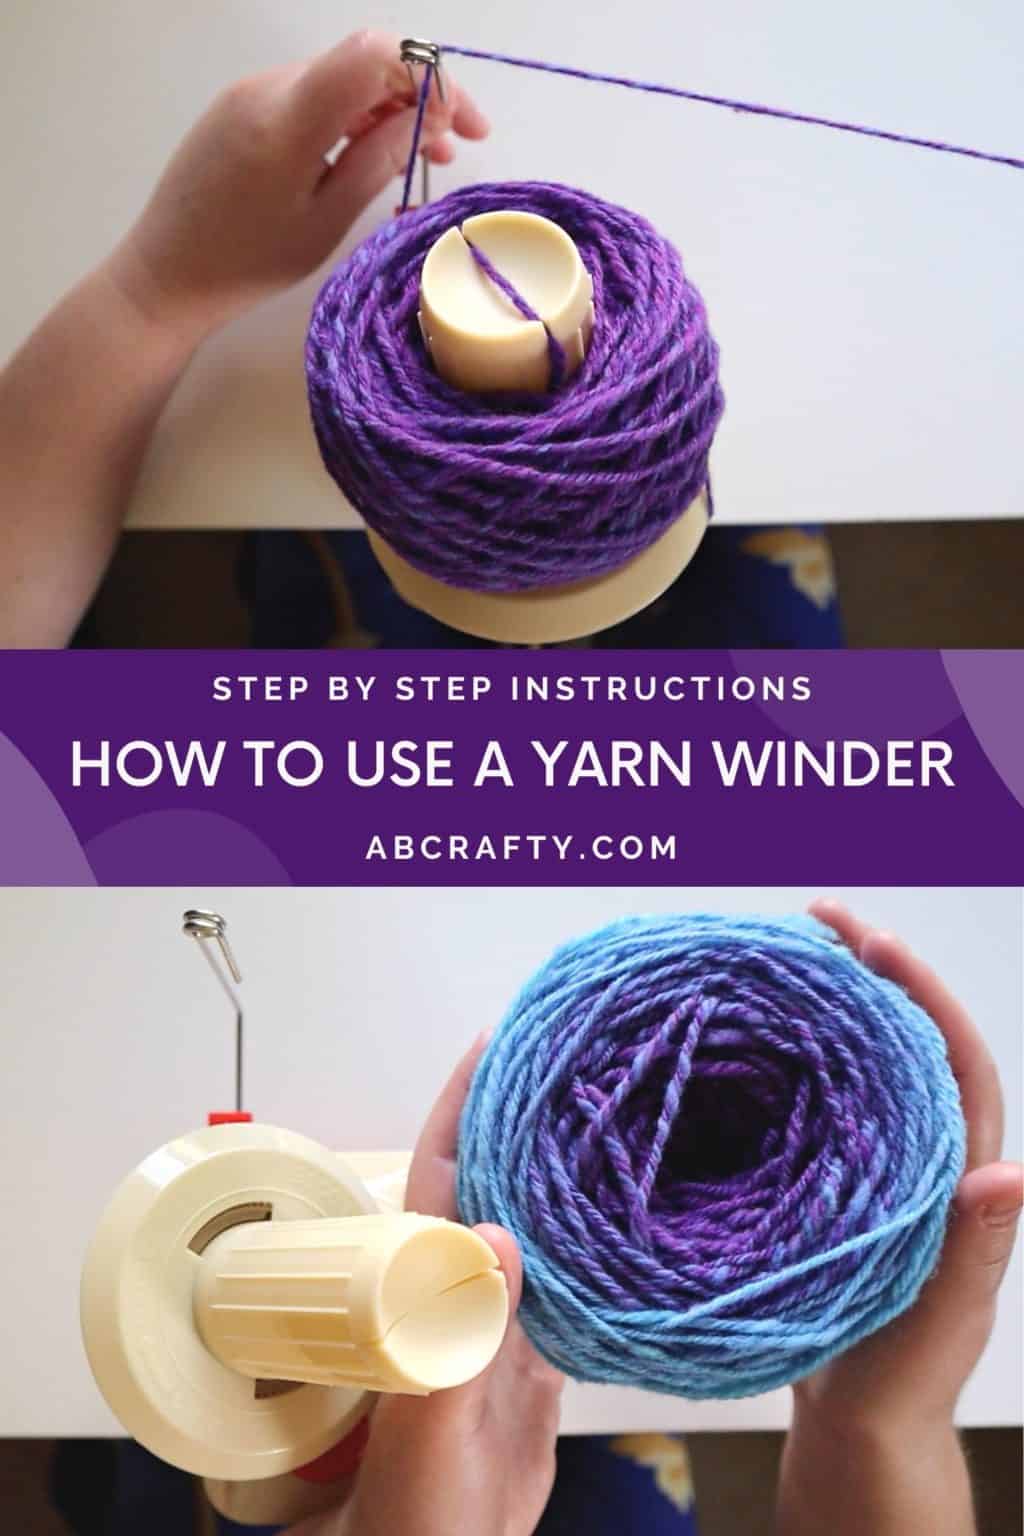 top photo shows purple yarn wound onto a yarn winder and the bottom shows a finished ball of yarn off of the yarn ball winder with the title "how to use a yarn winder"